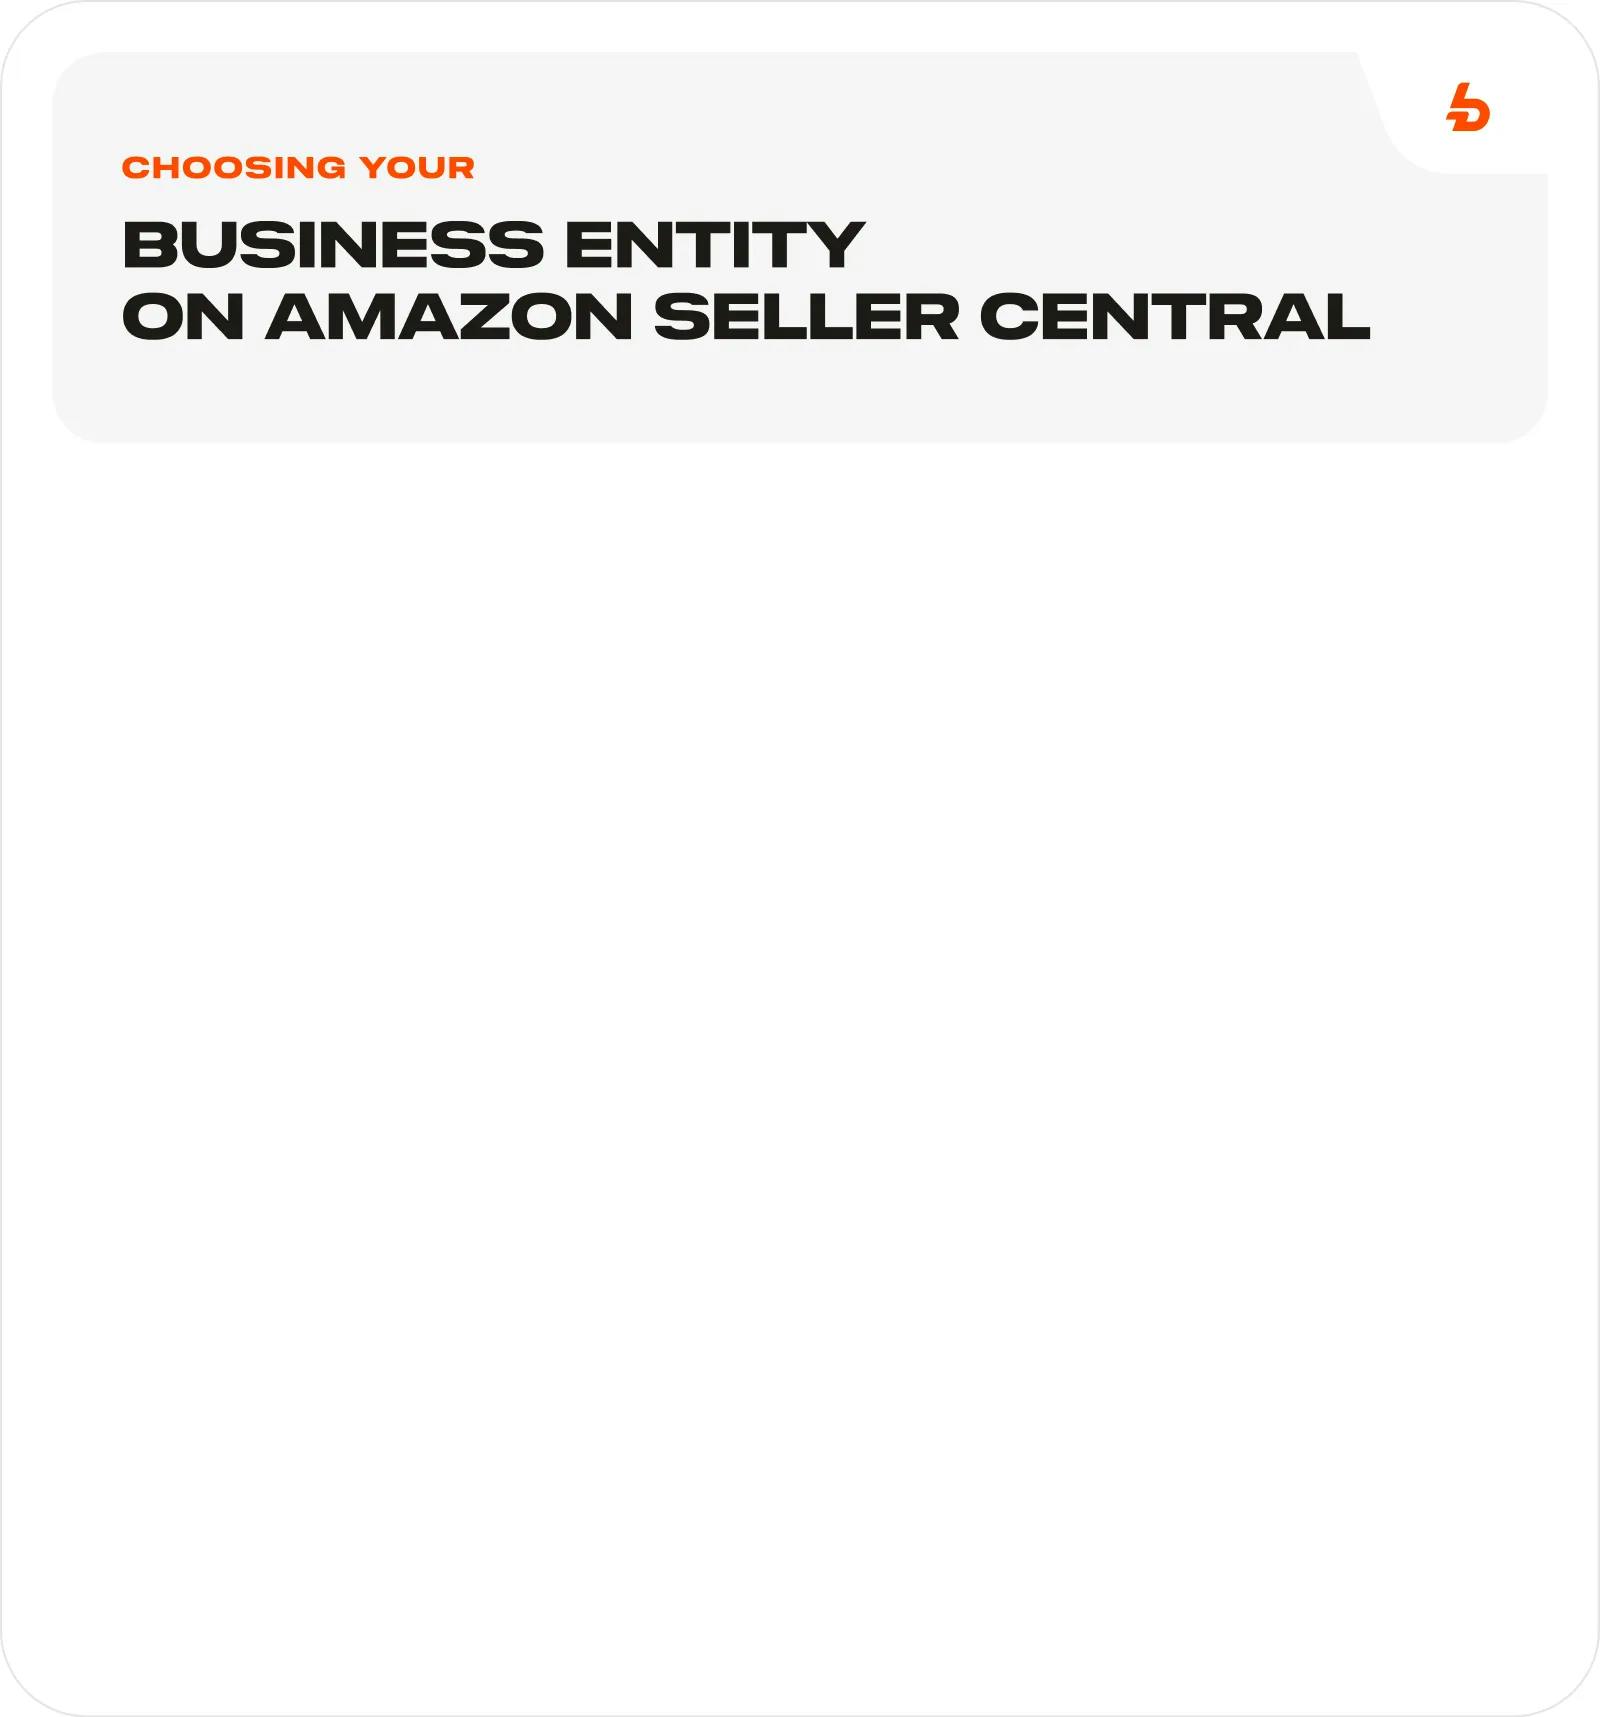 Choosing Your Business Entity on Amazon Seller Central